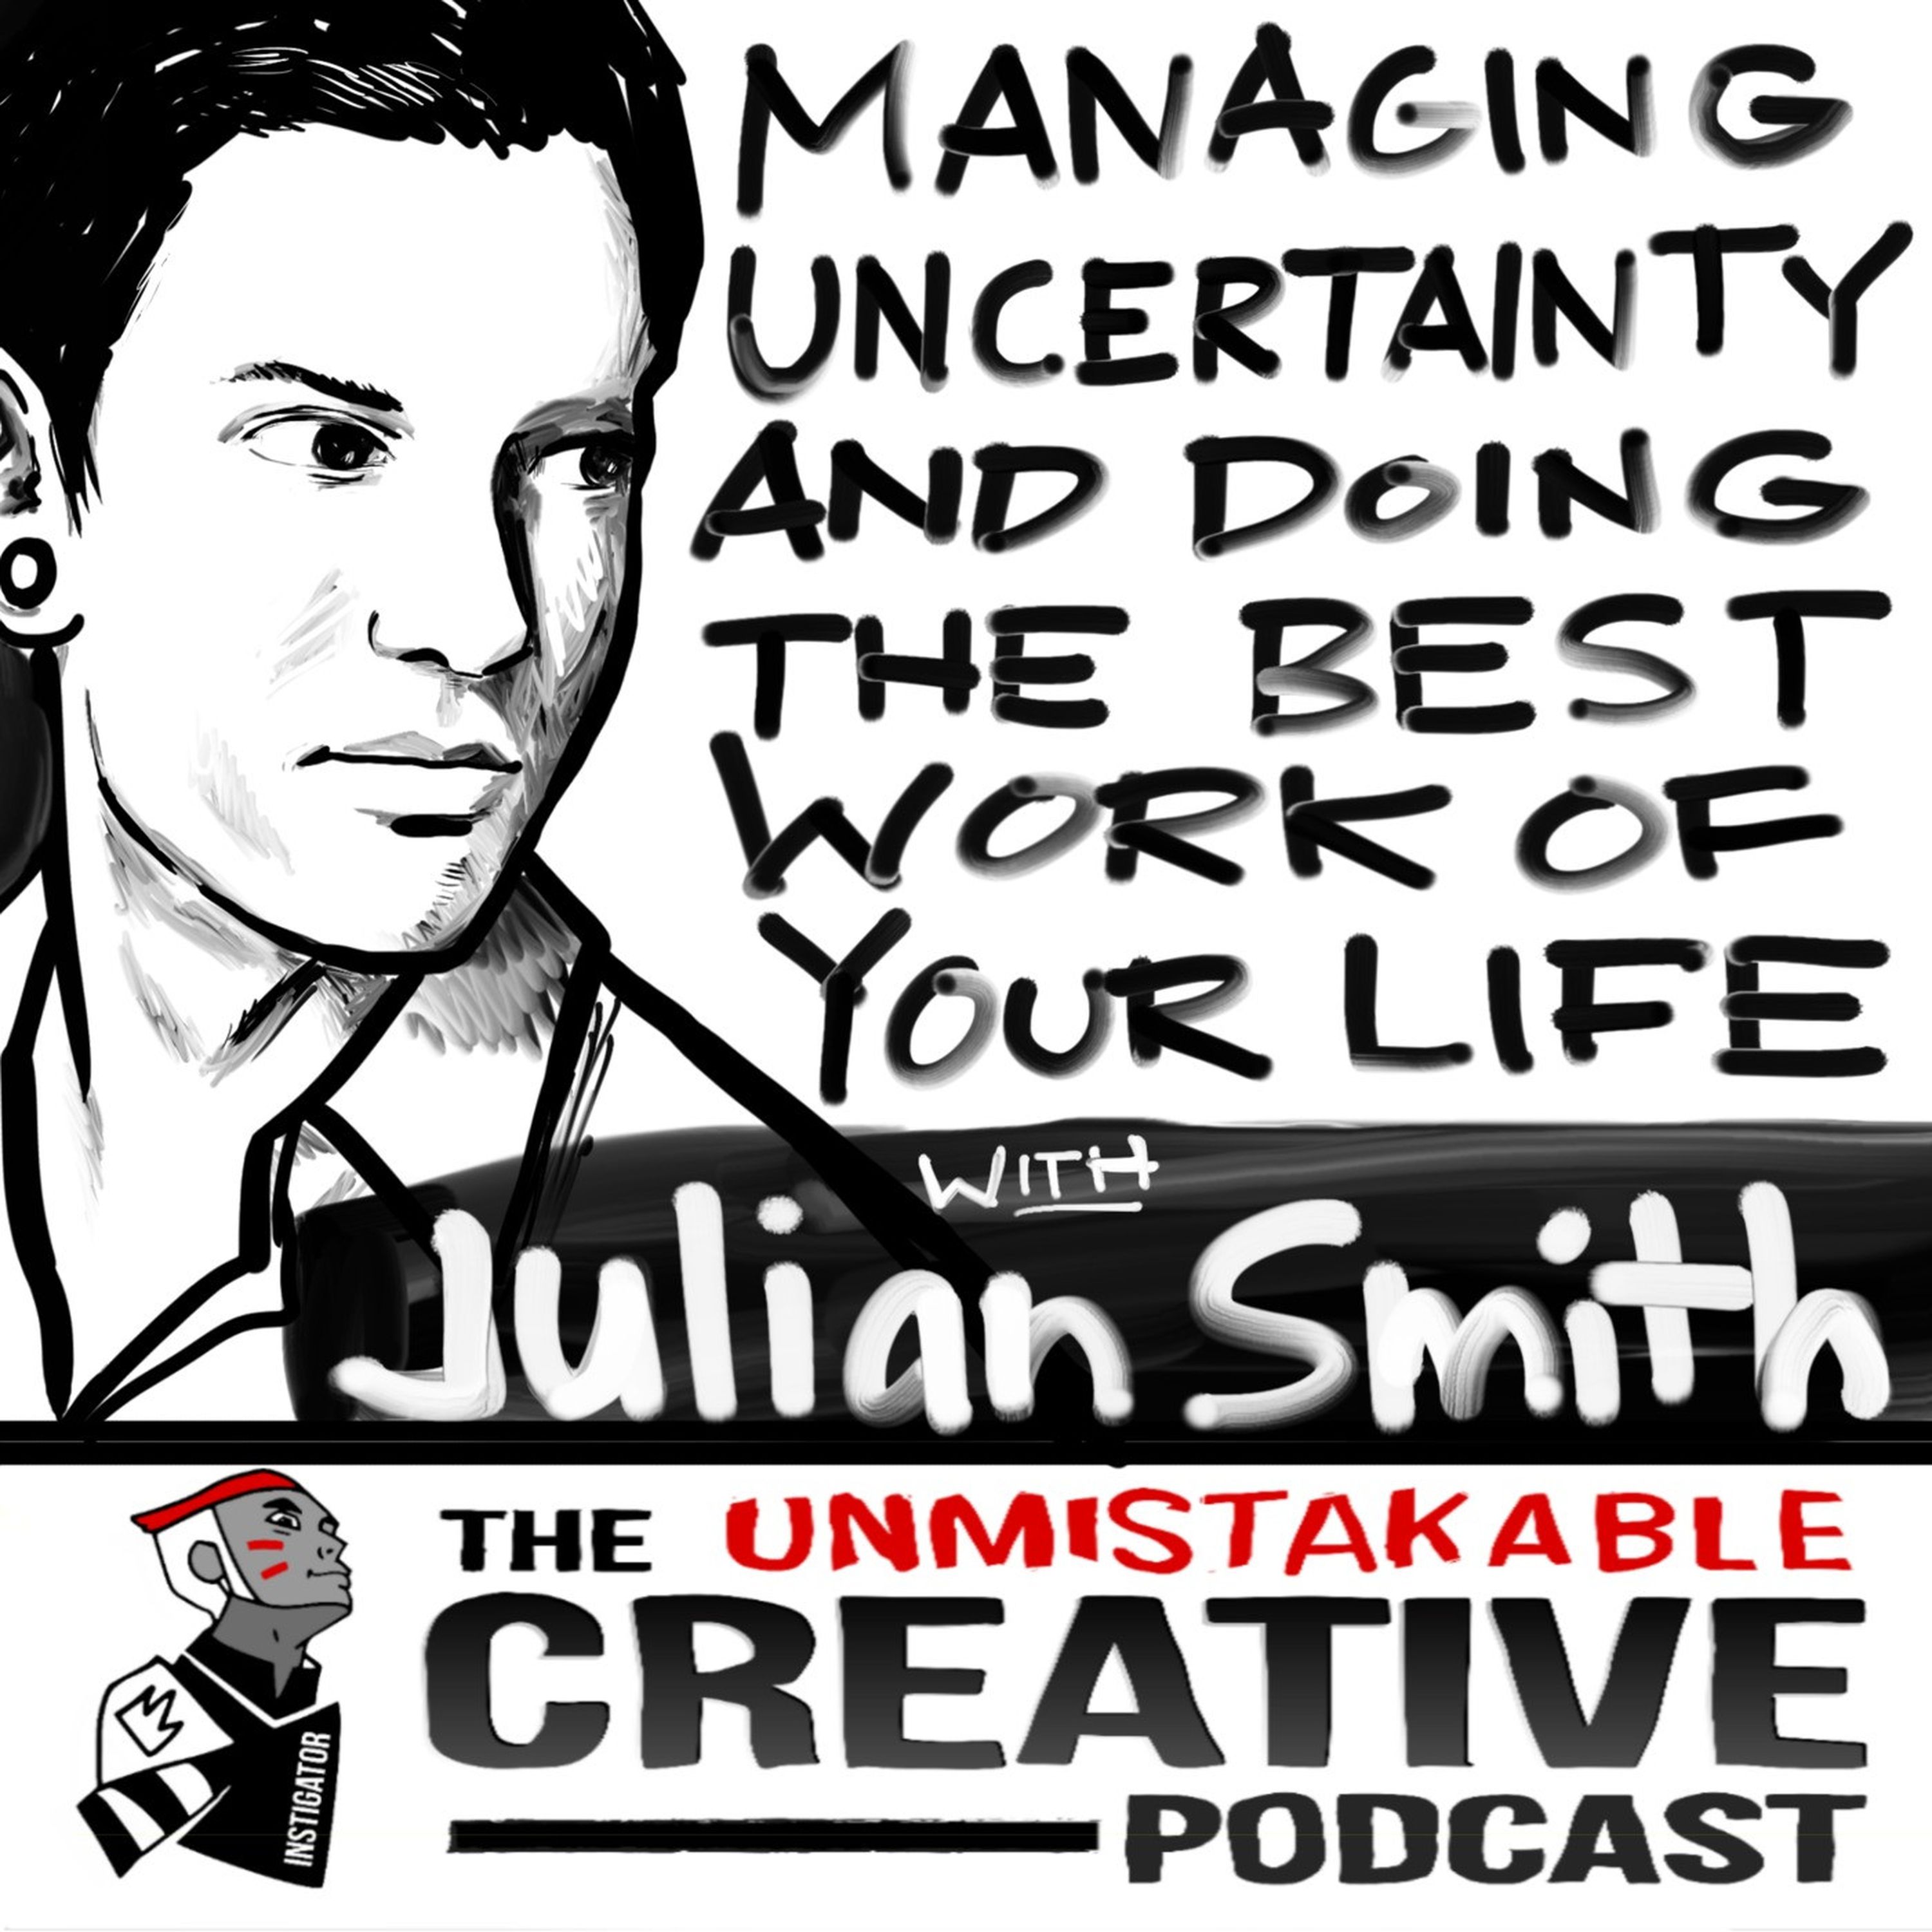 Managing Uncertainty and Continually Doing the Best Work of Your Life With Julien Smith Image